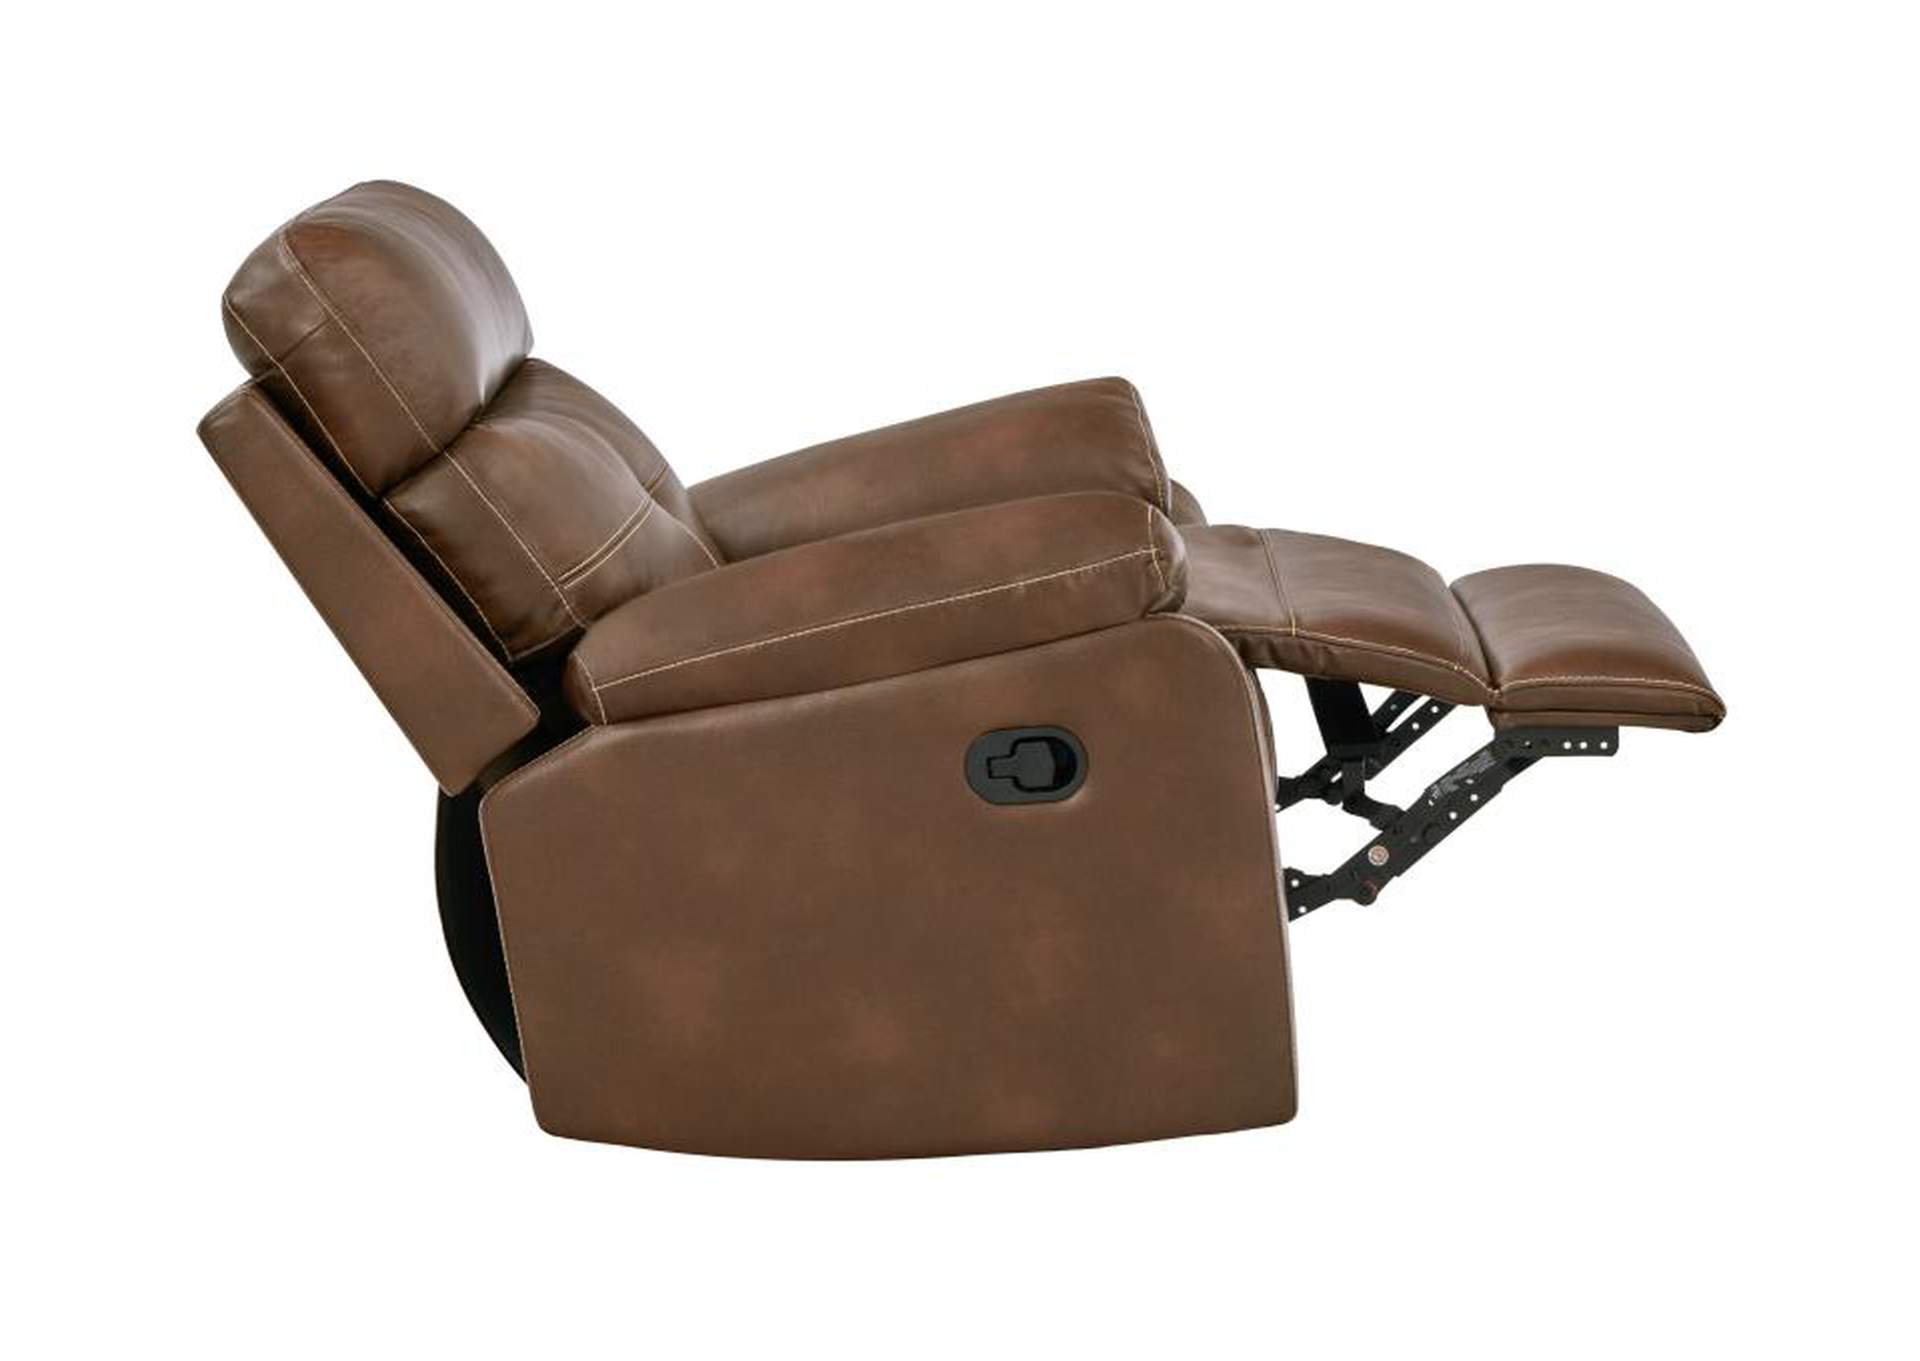 Damiano Upholstered Glider Recliner Tri-tone Brown,Coaster Furniture